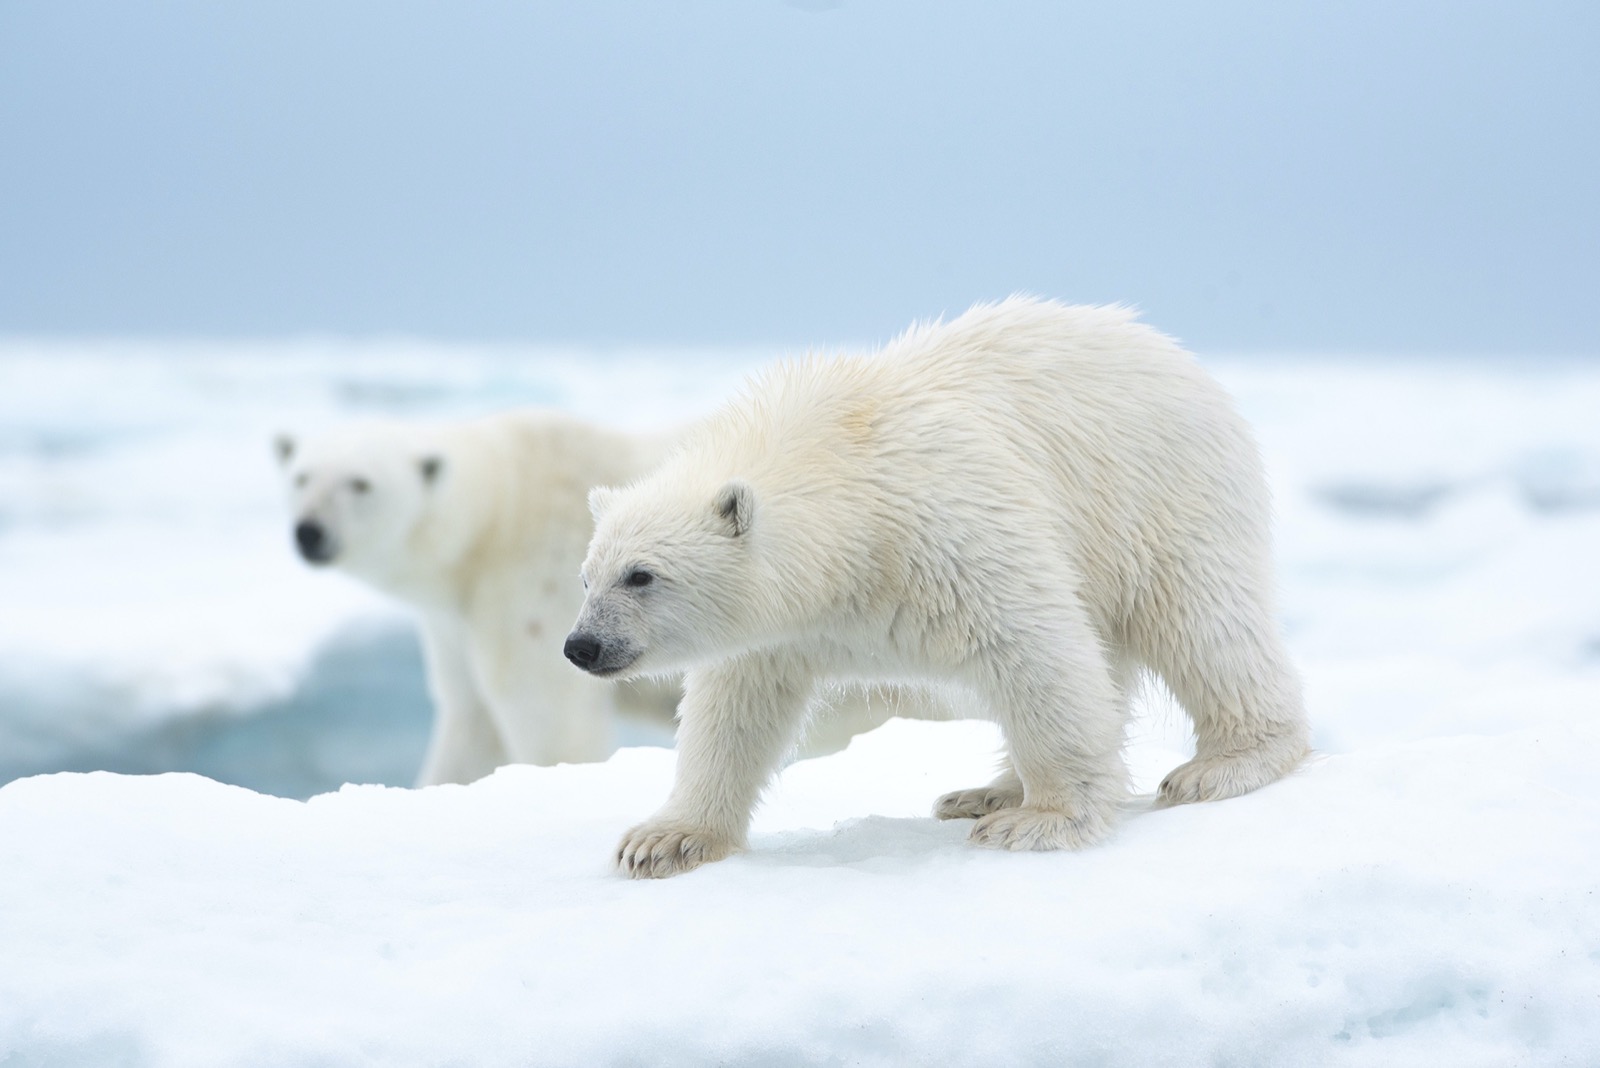 This Animal Quiz Might Not Be Hardest 1 You've Ever Taken, But It Certainly Isn't Easy Polar Bears